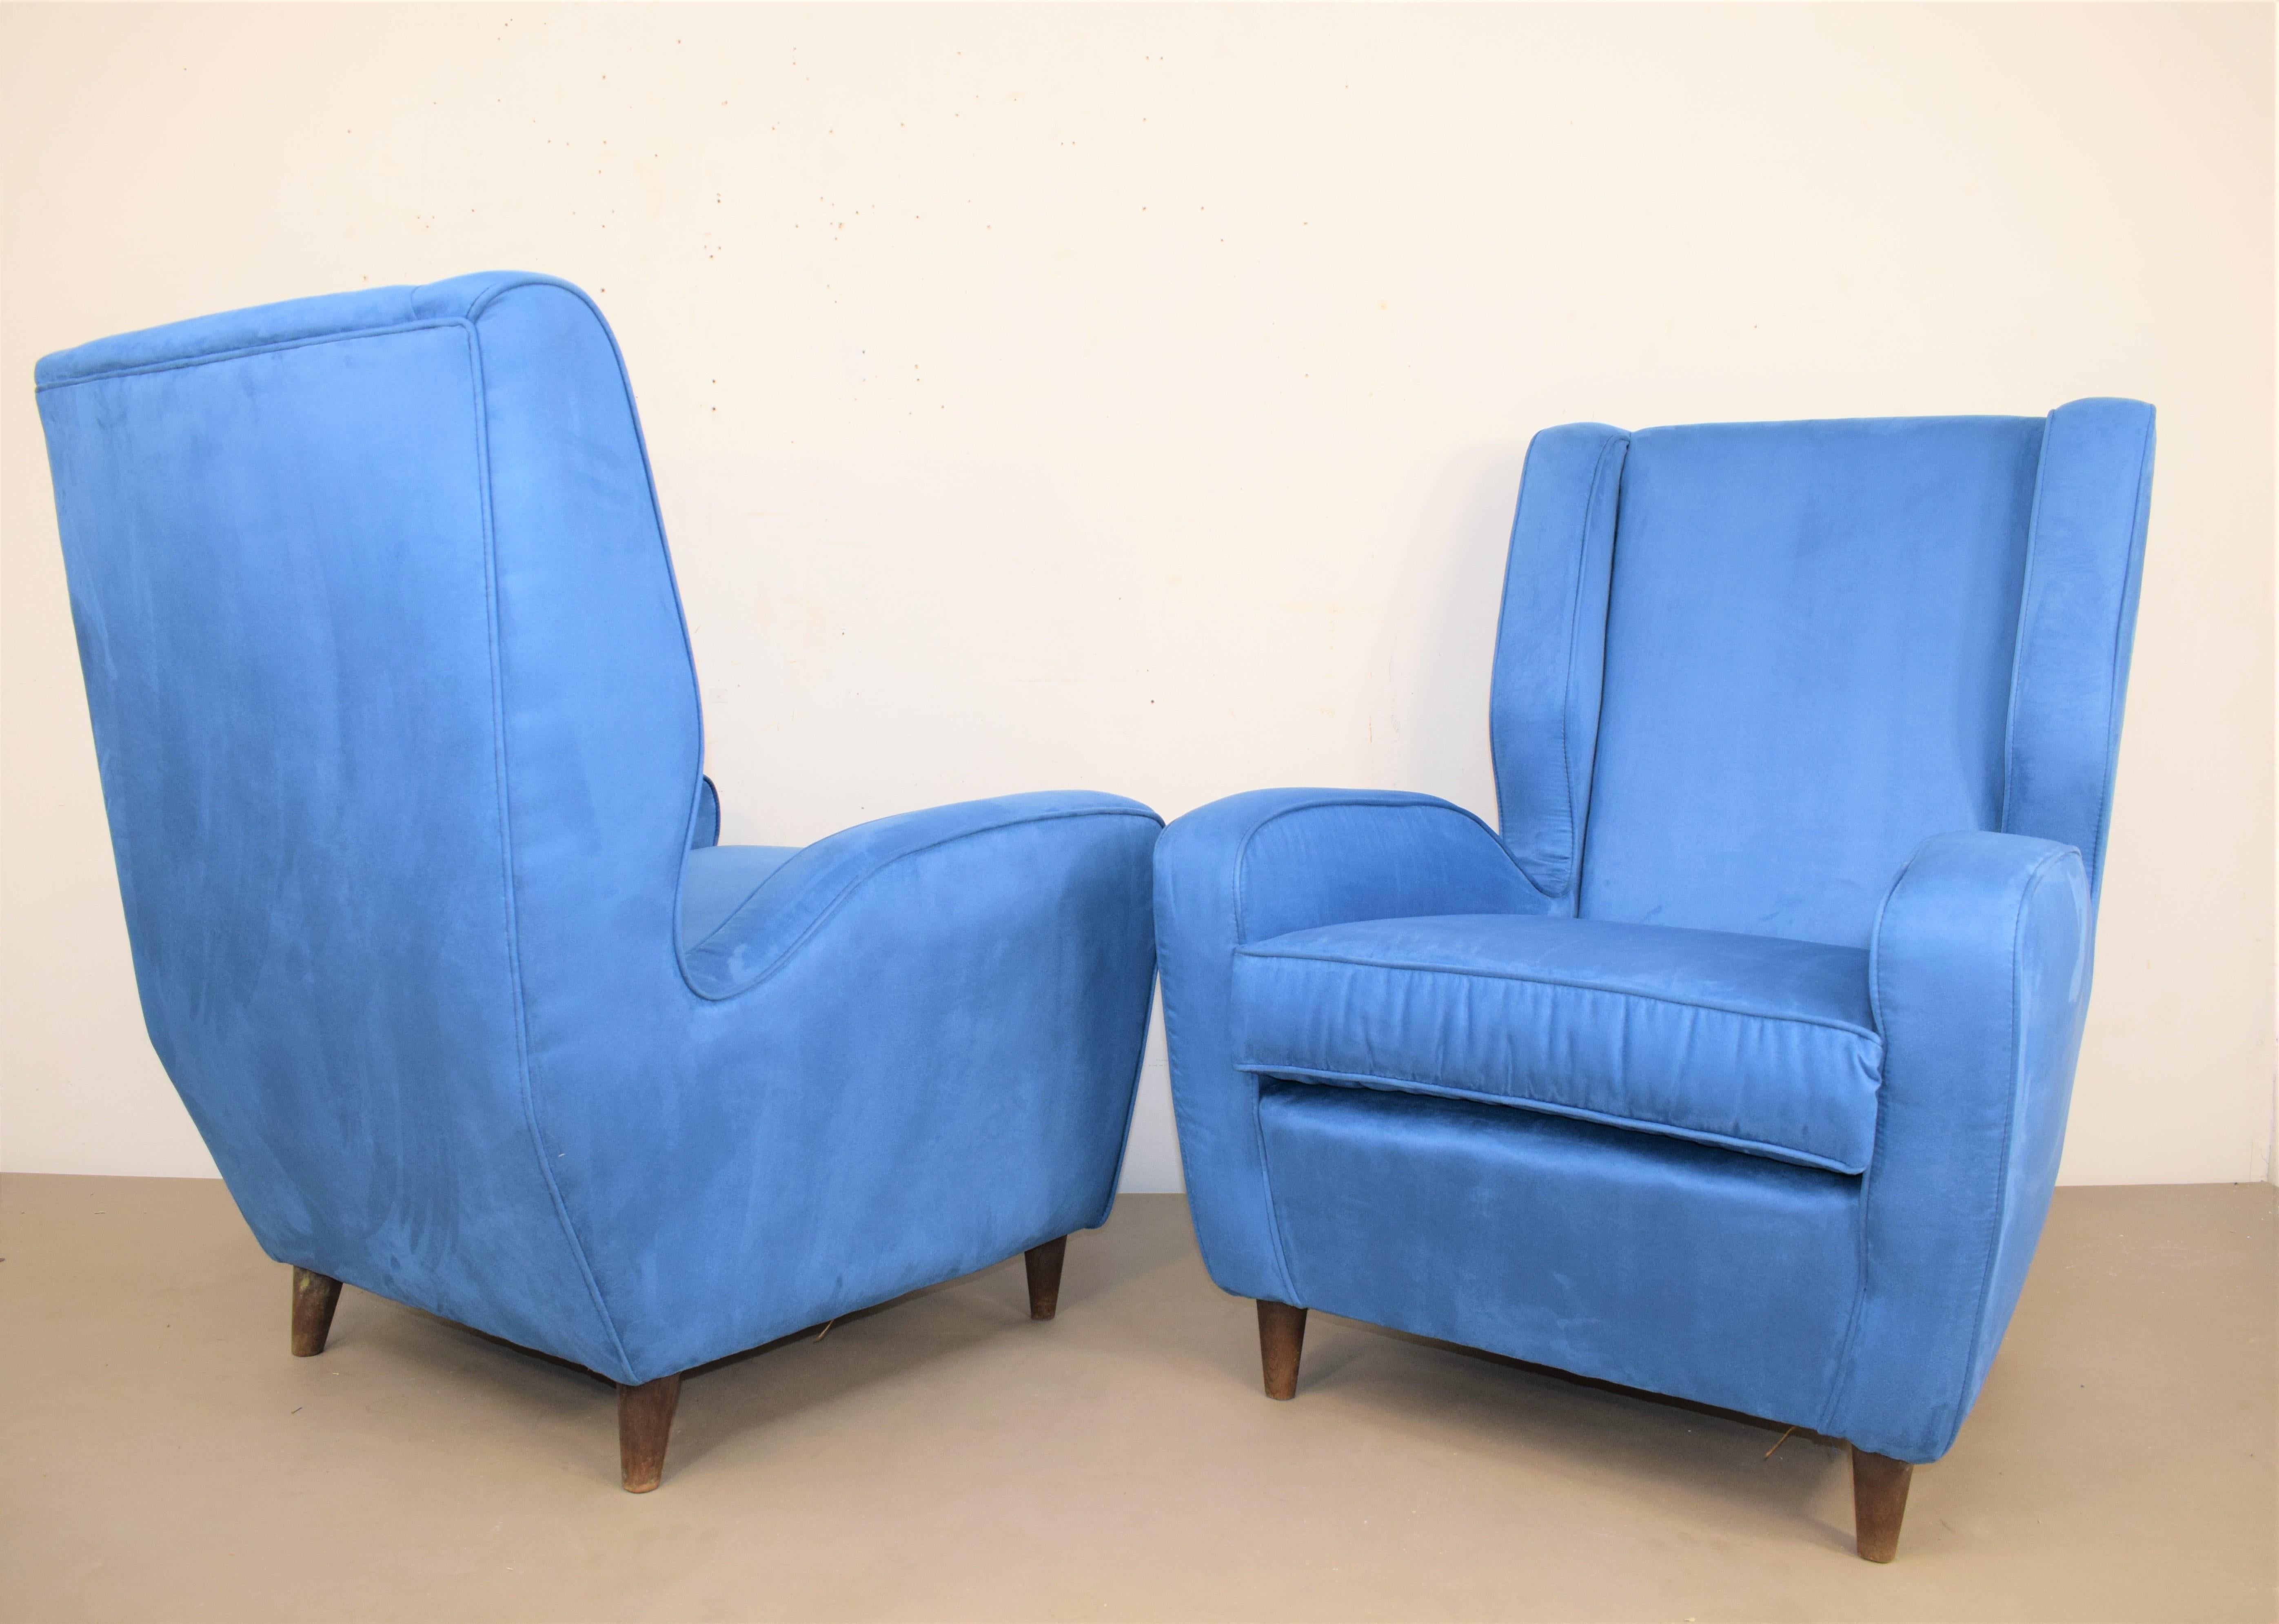 Pair of armchairs, Melchiorre Bega (in the style of), Italian production from the 1950s.
Wood and fabric.
Excellent condition, no defects (see photos).

Dimensions: 
H: 95cm; D: 73cm; W= 78cm; H seat = 46cm.